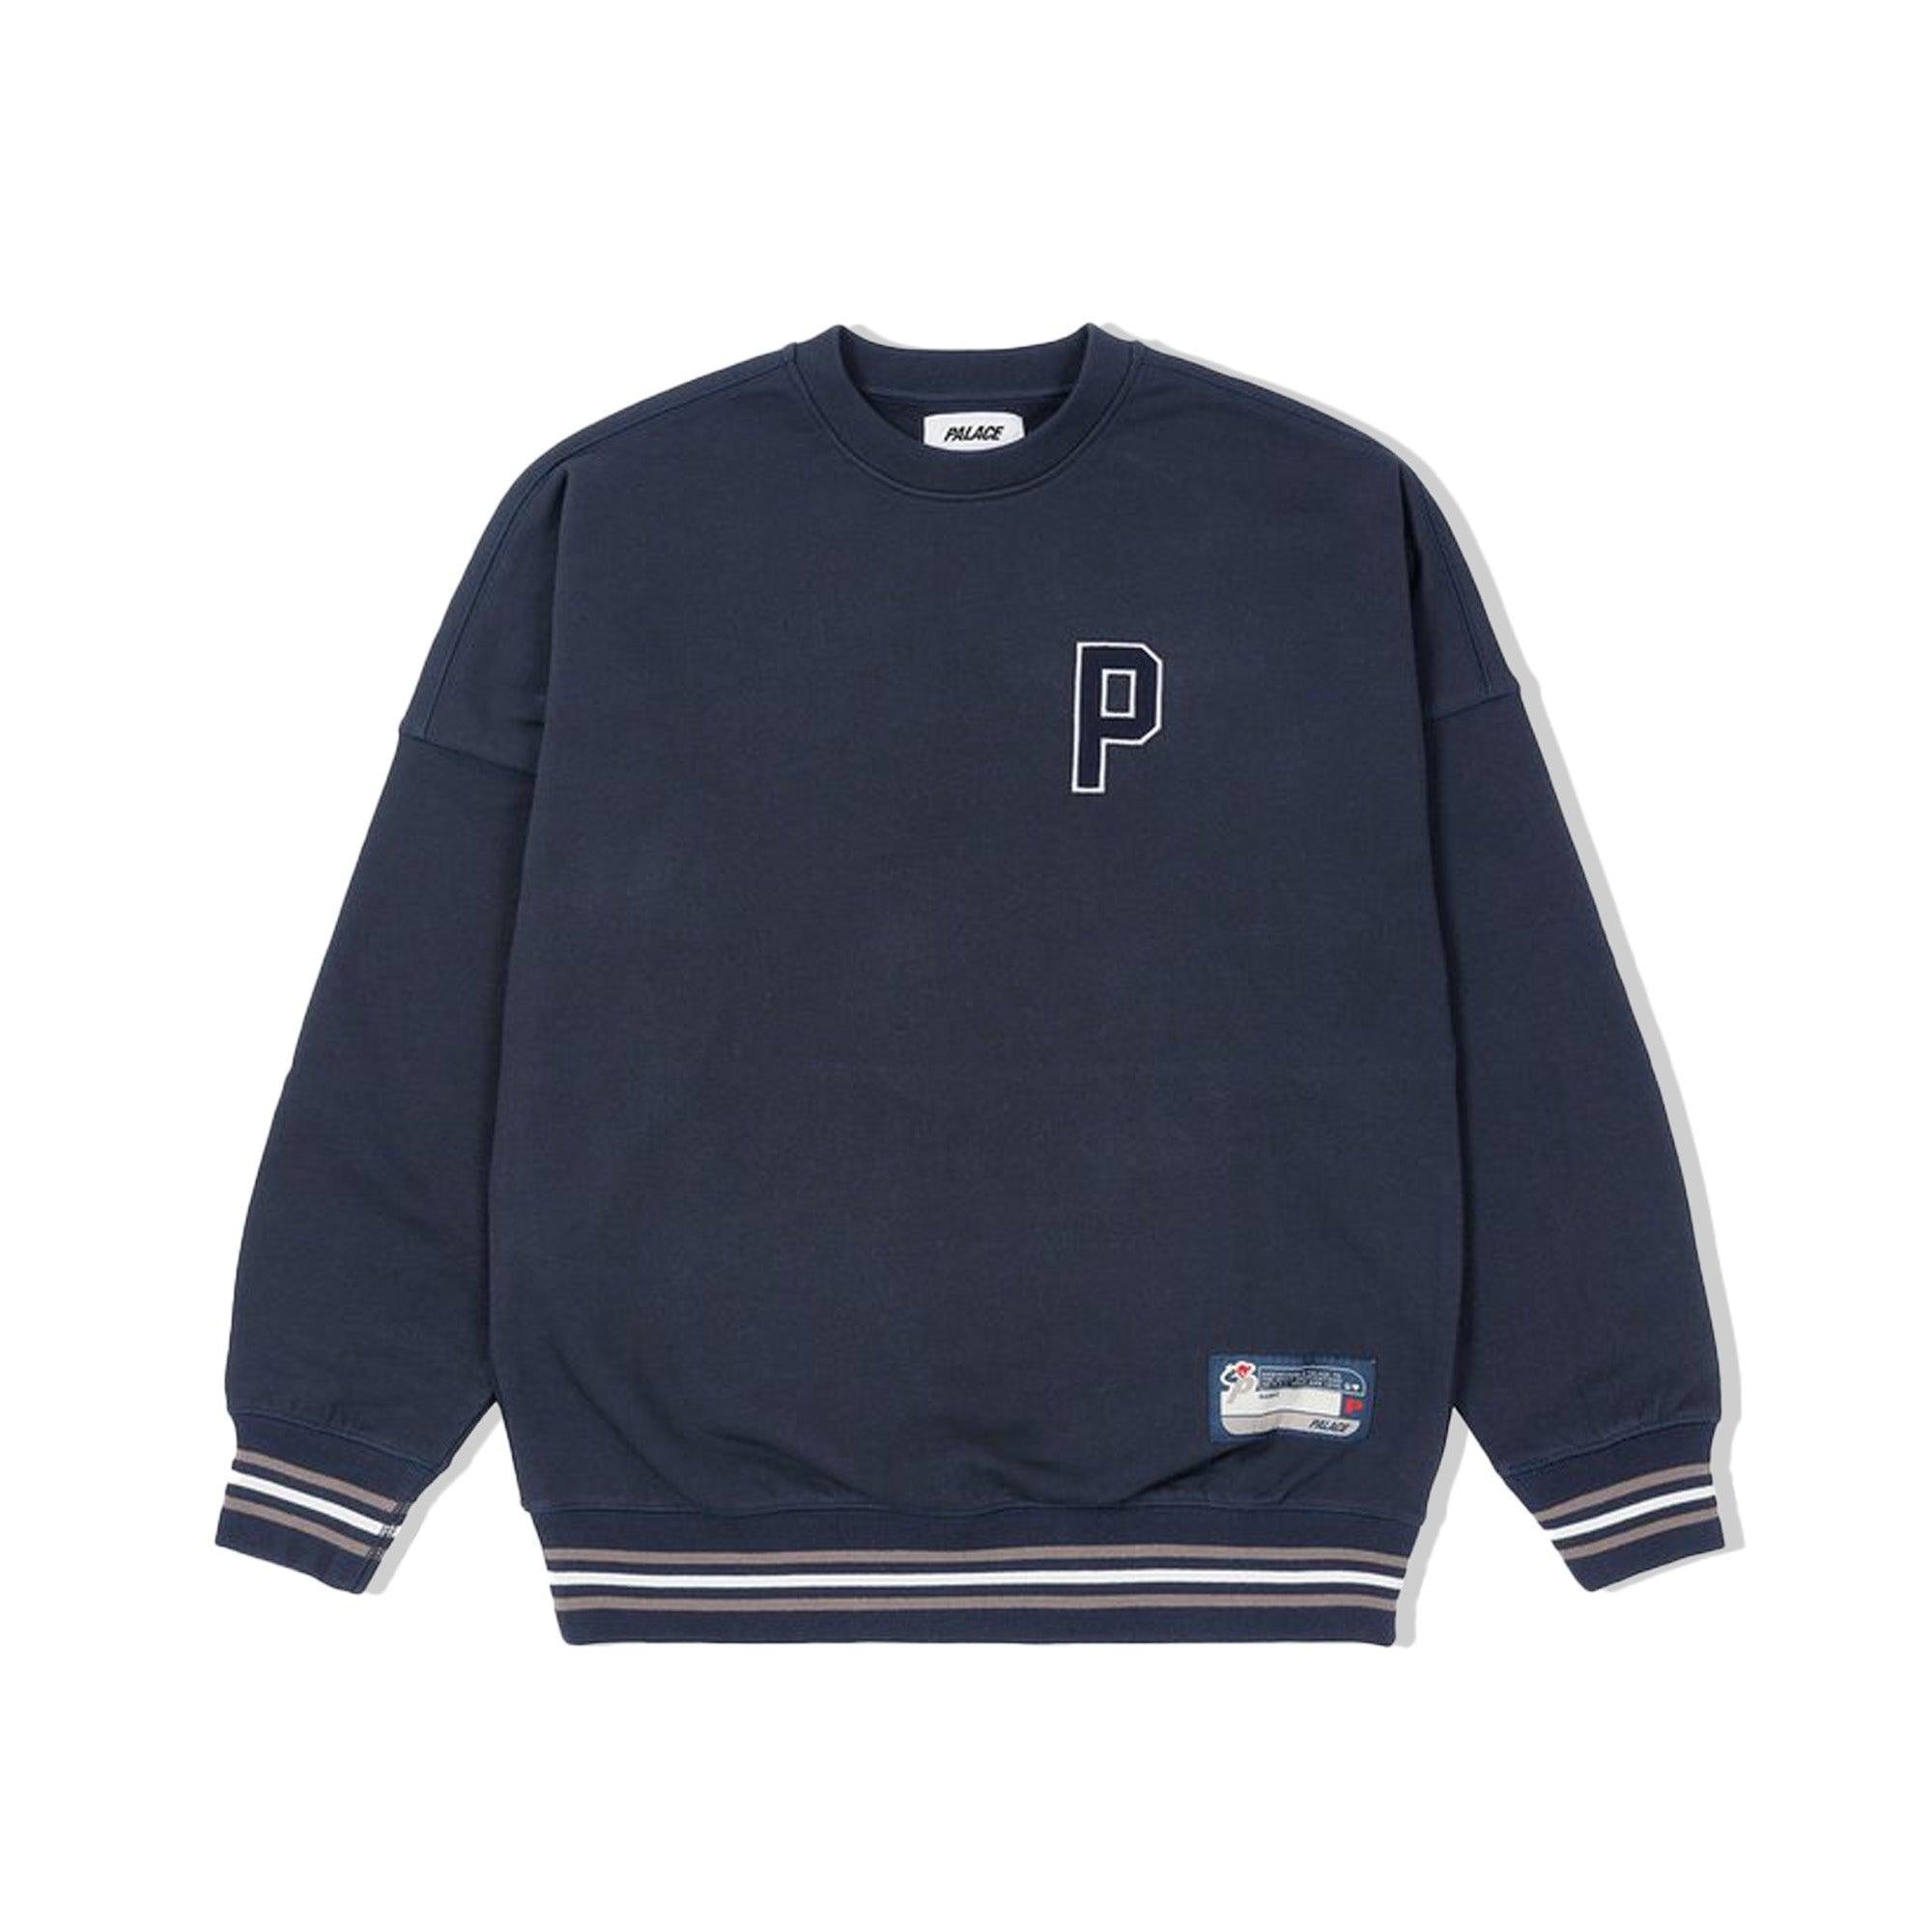 Buy Palace Palace Drop Shoulder College Crew Navy Online